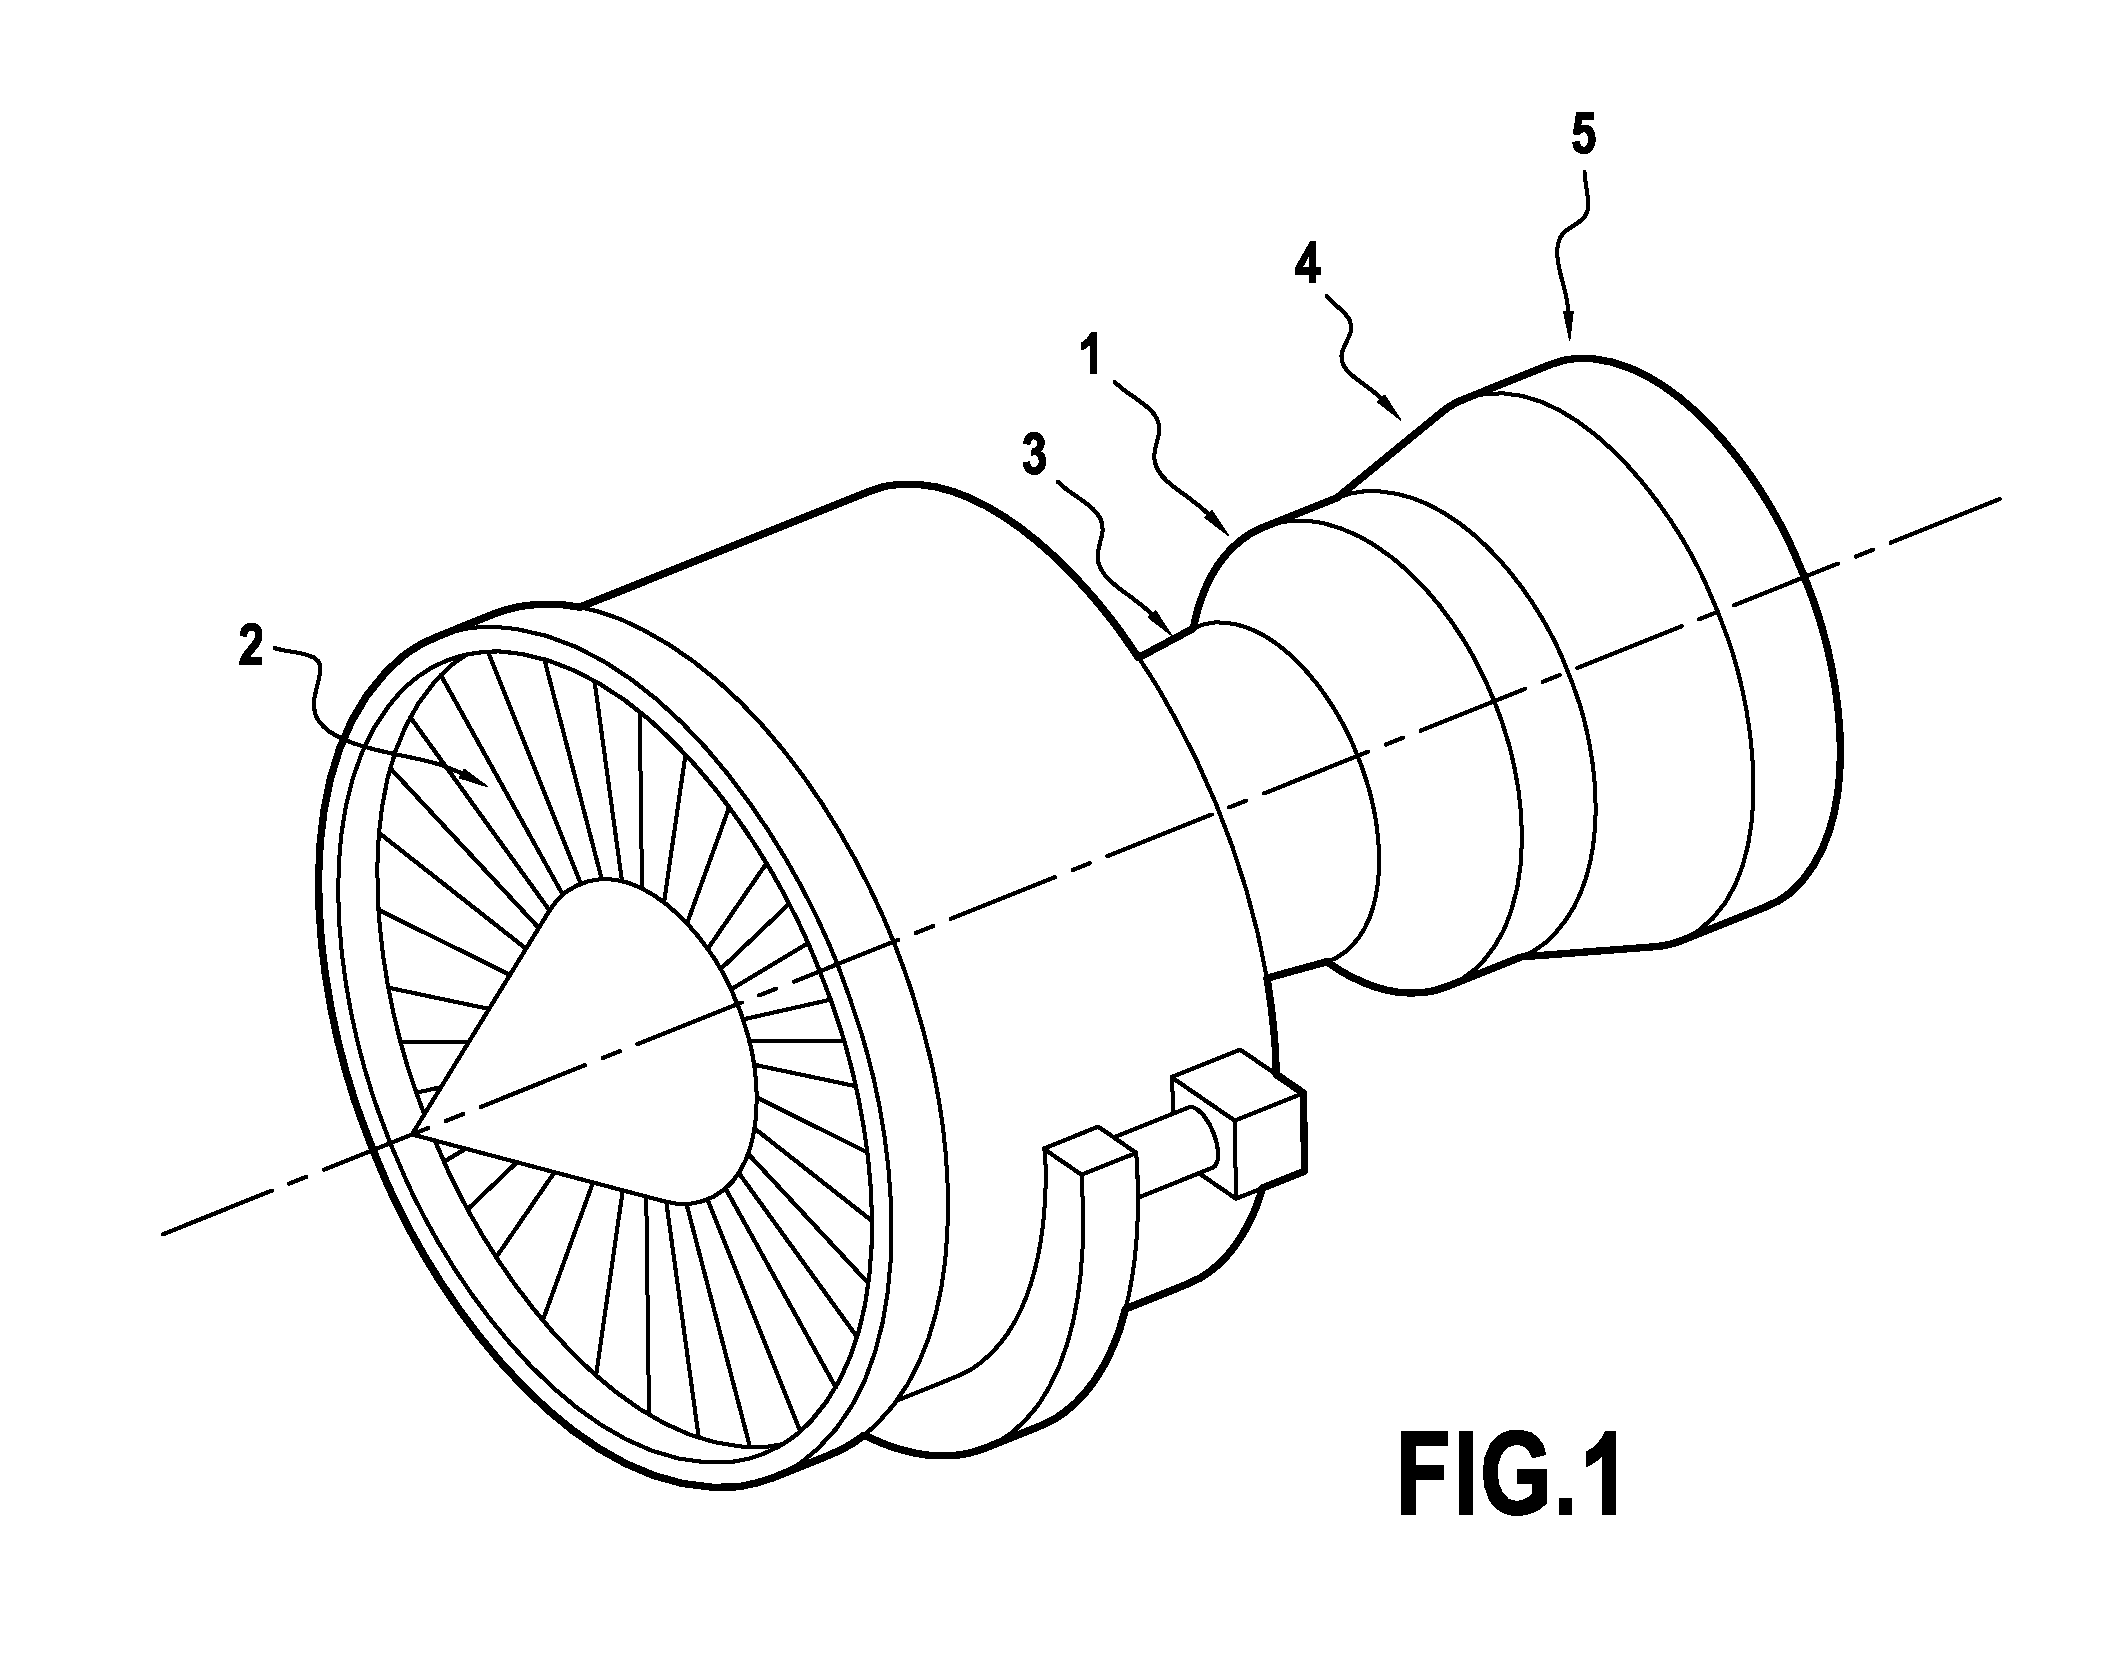 Gas turbine combustion chamber made of CMC material and subdivided into sectors